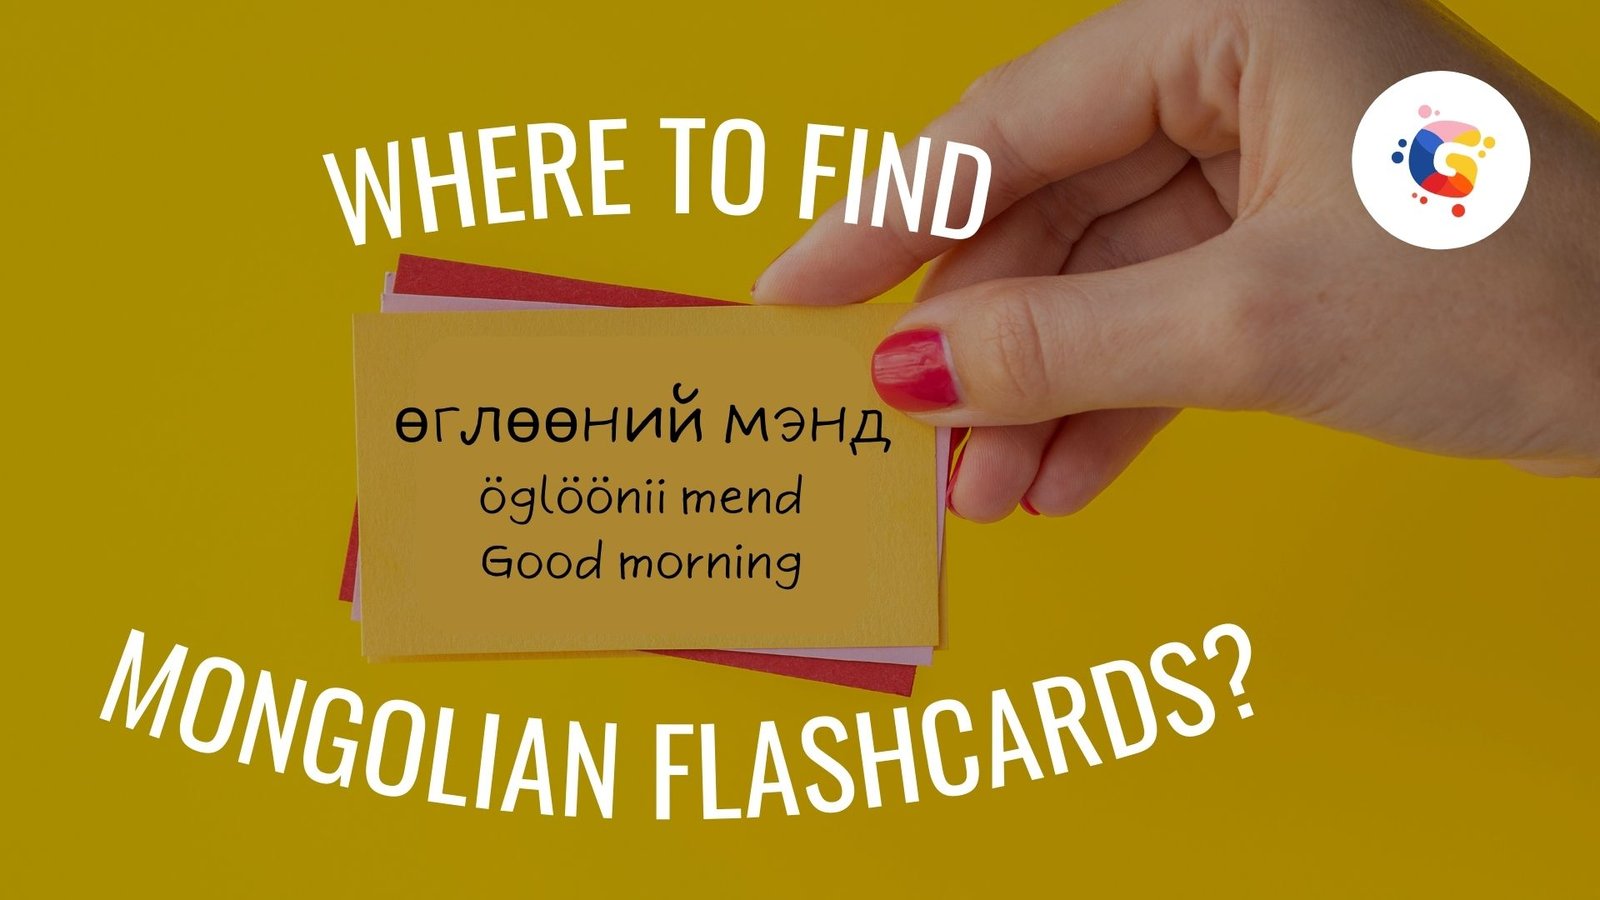 Top 5 Places To Find Mongolian Flashcards Free!